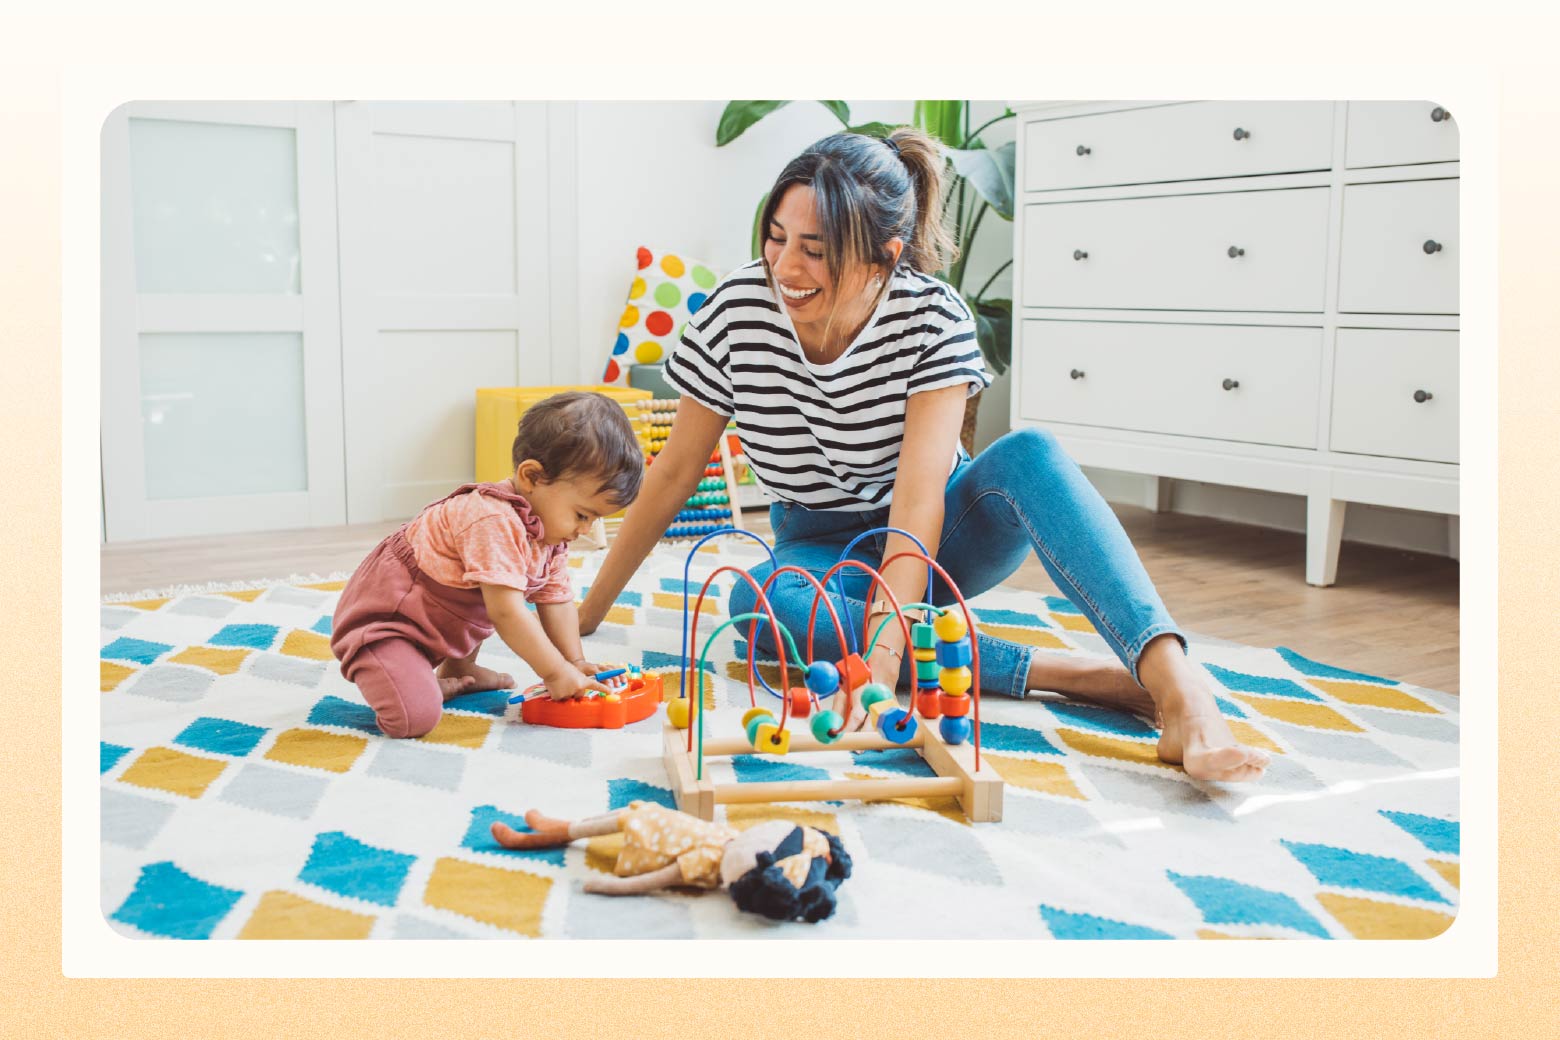 Woman and baby play with toys while sitting on the floor